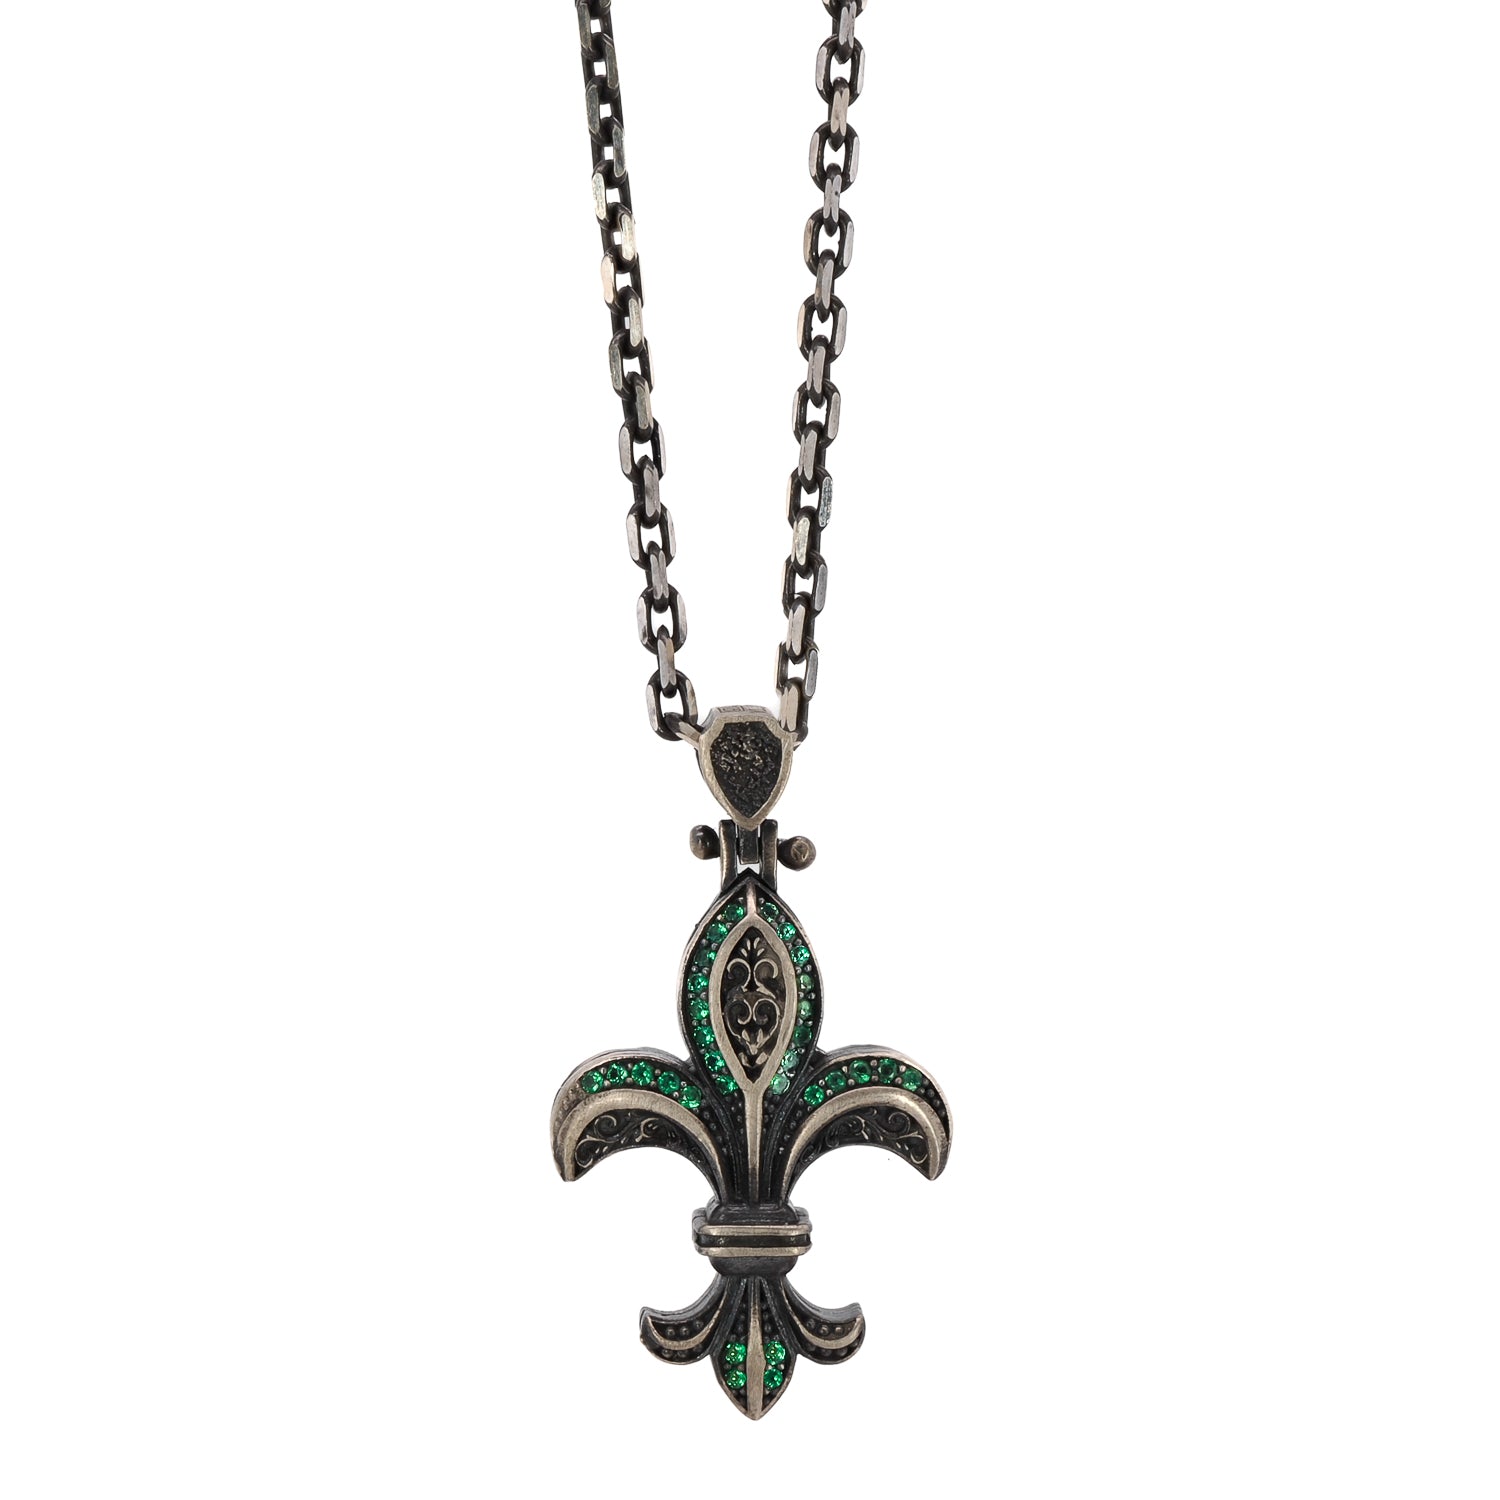 Adorn yourself with the Unique Designer Fleur de Lis Necklace, a handcrafted masterpiece carved from high-quality sterling silver.